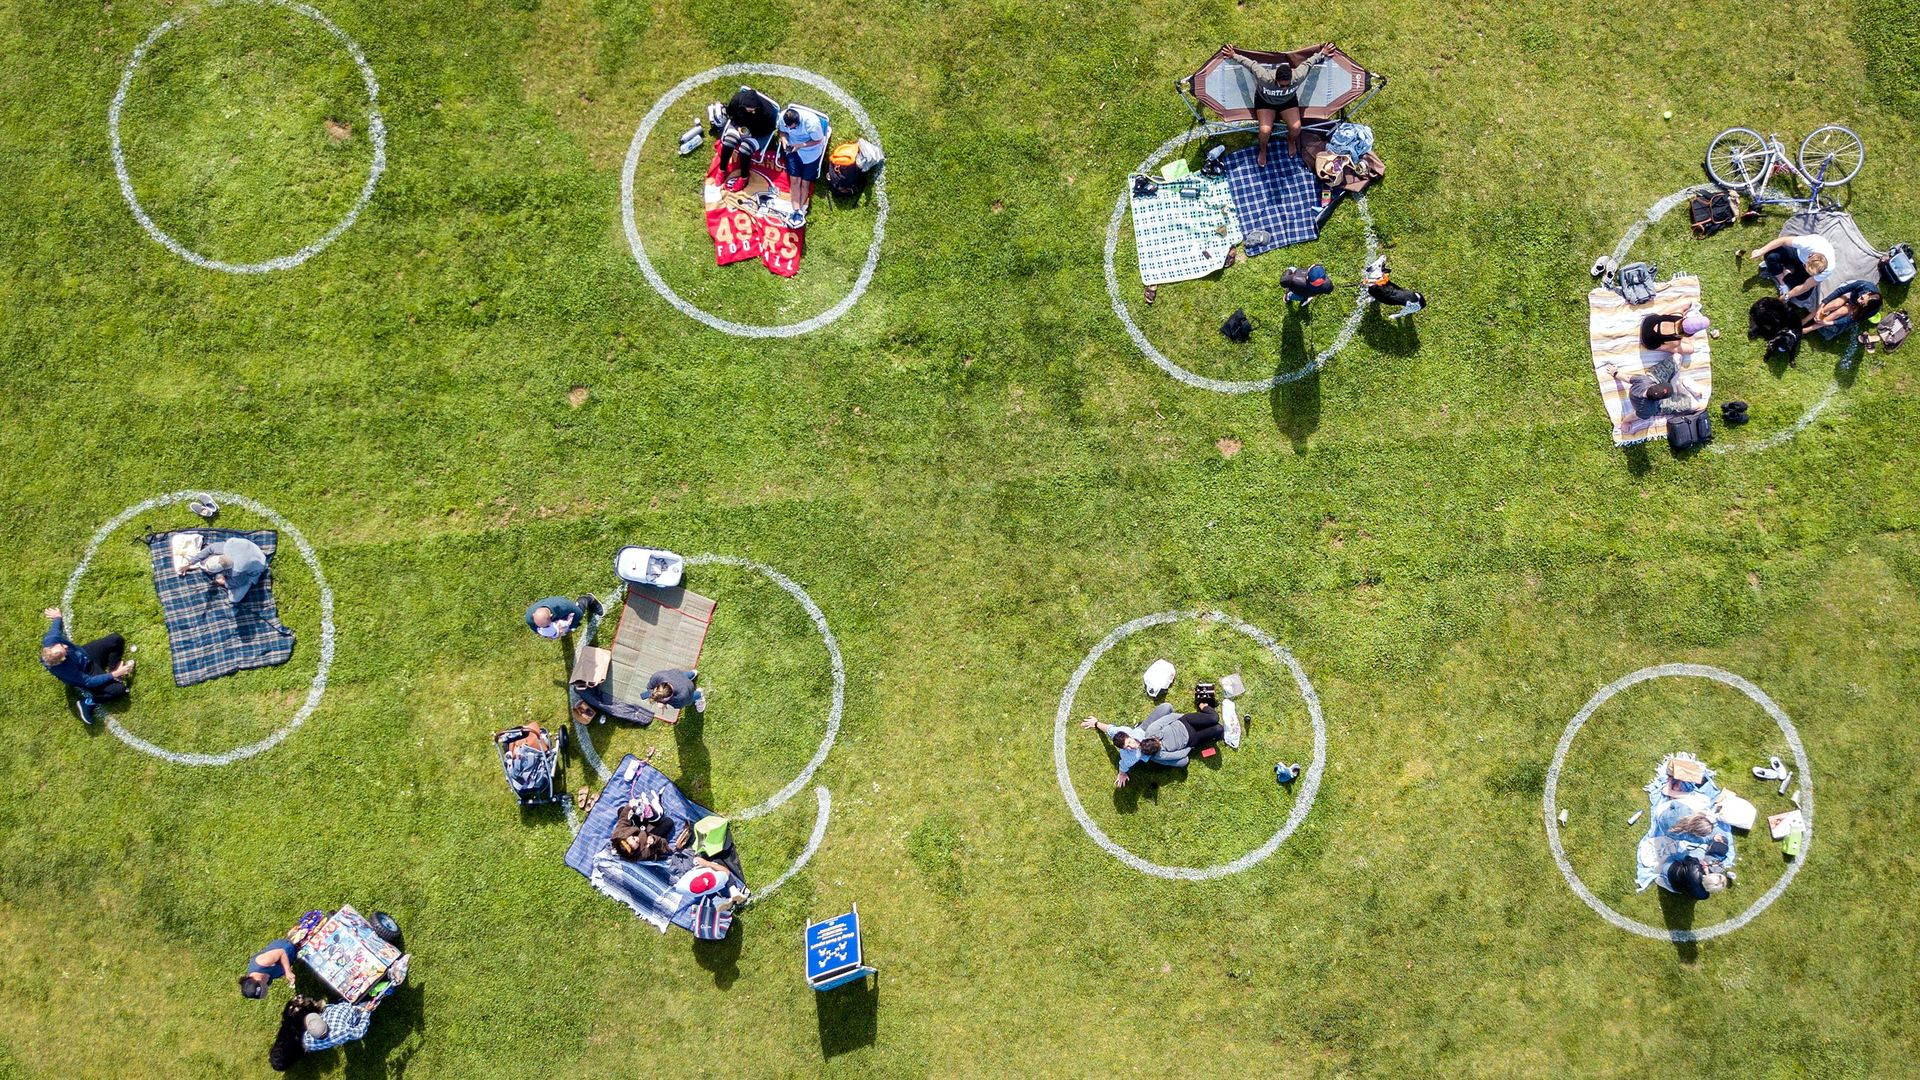 In this image, people sit in separate chalk circles on a grassy field